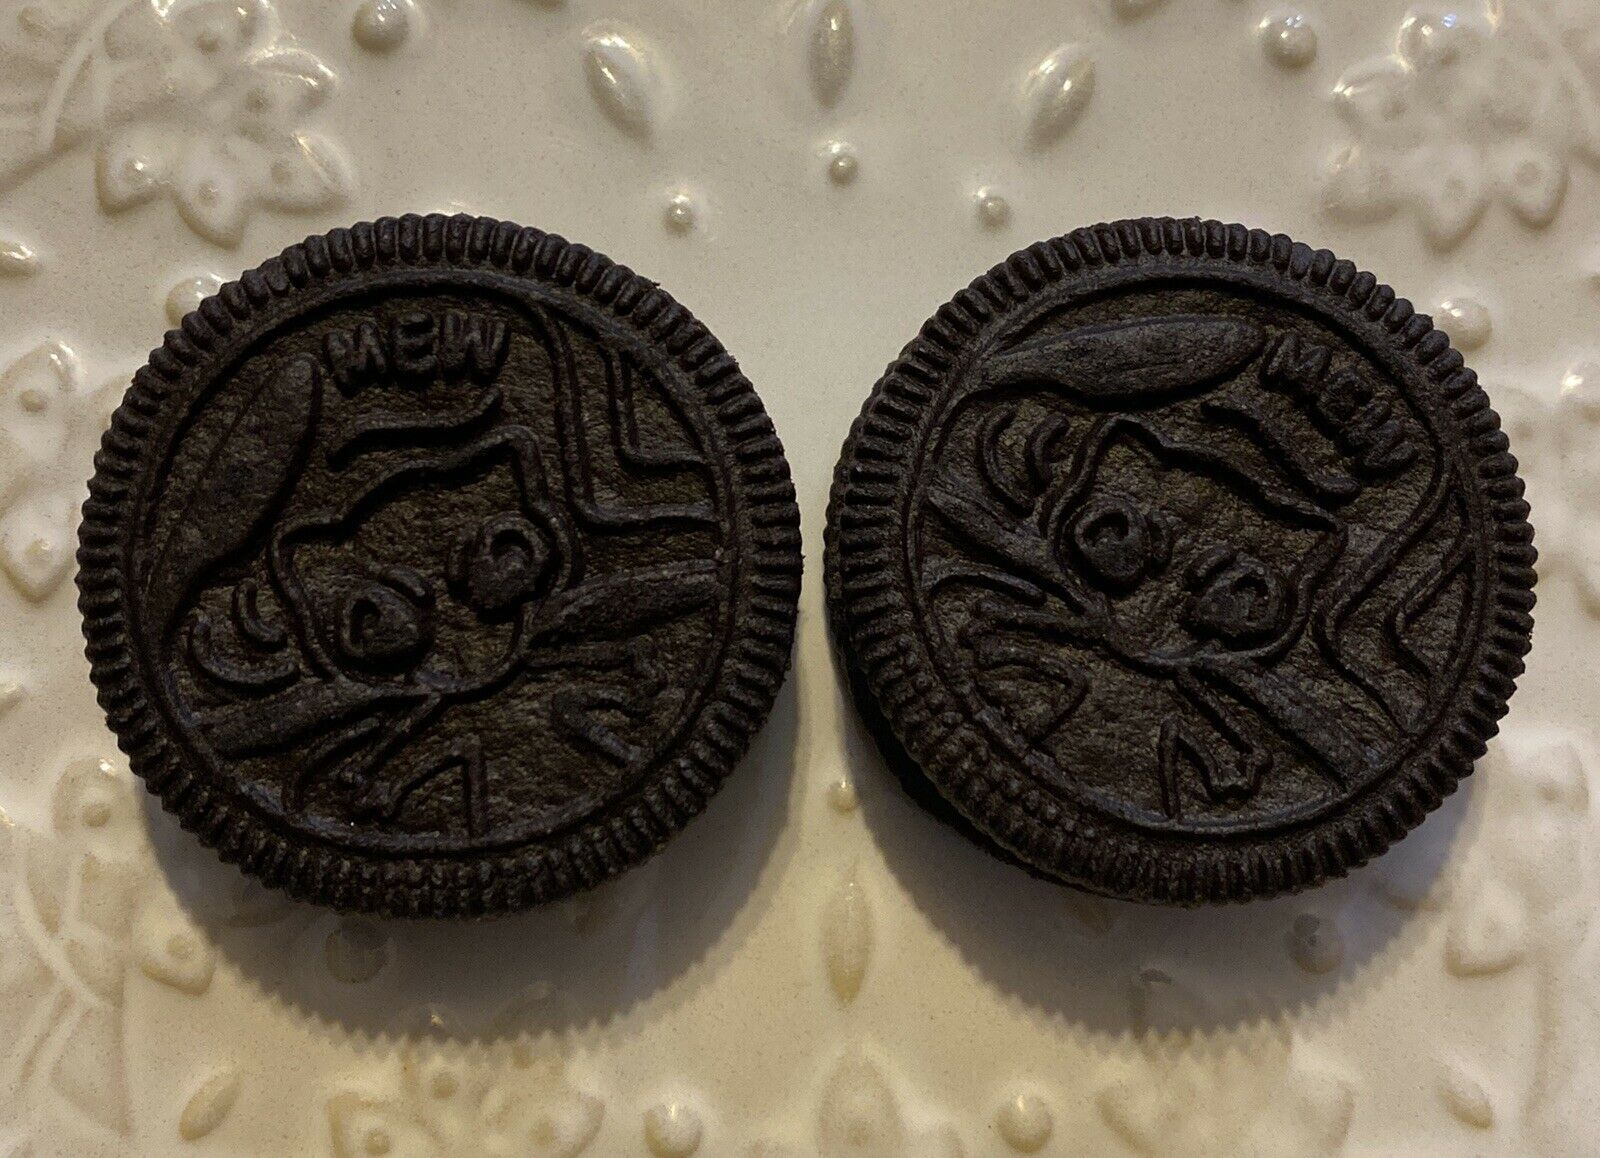 Pokemon Oreos Are Now Being Sold For More Than Some People's